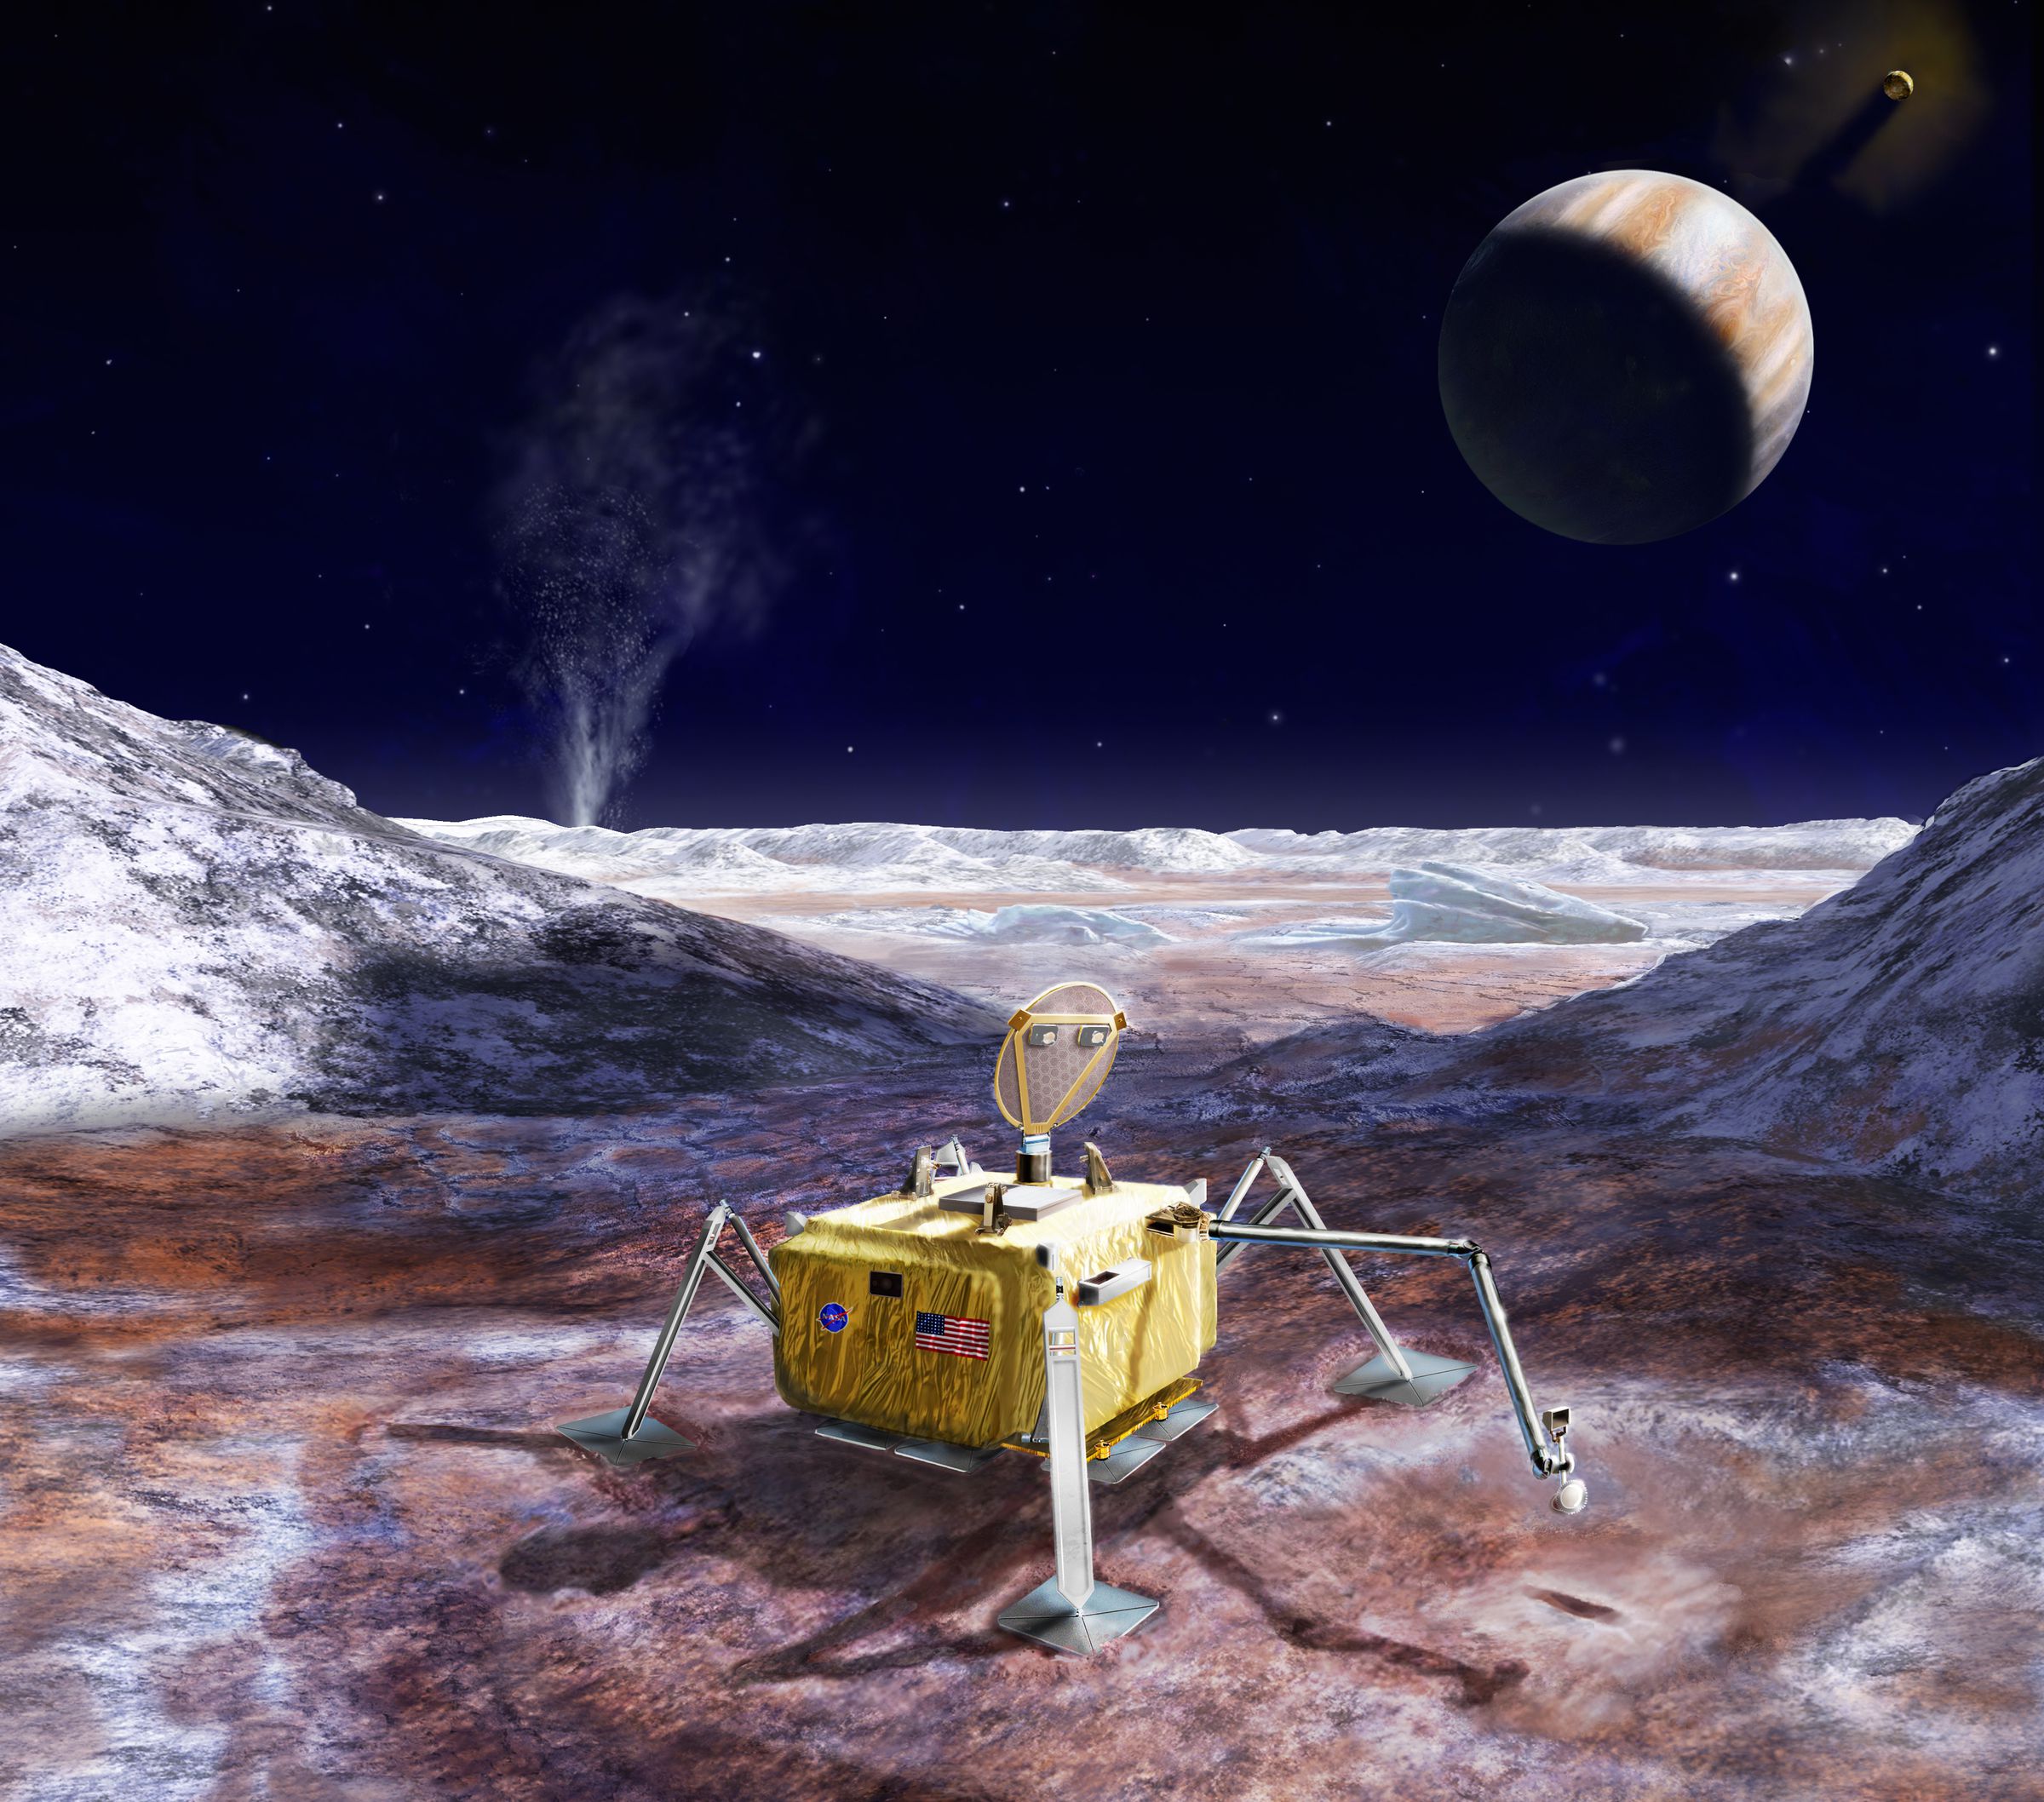 An illustration of what NASA’s Europa lander could look like.